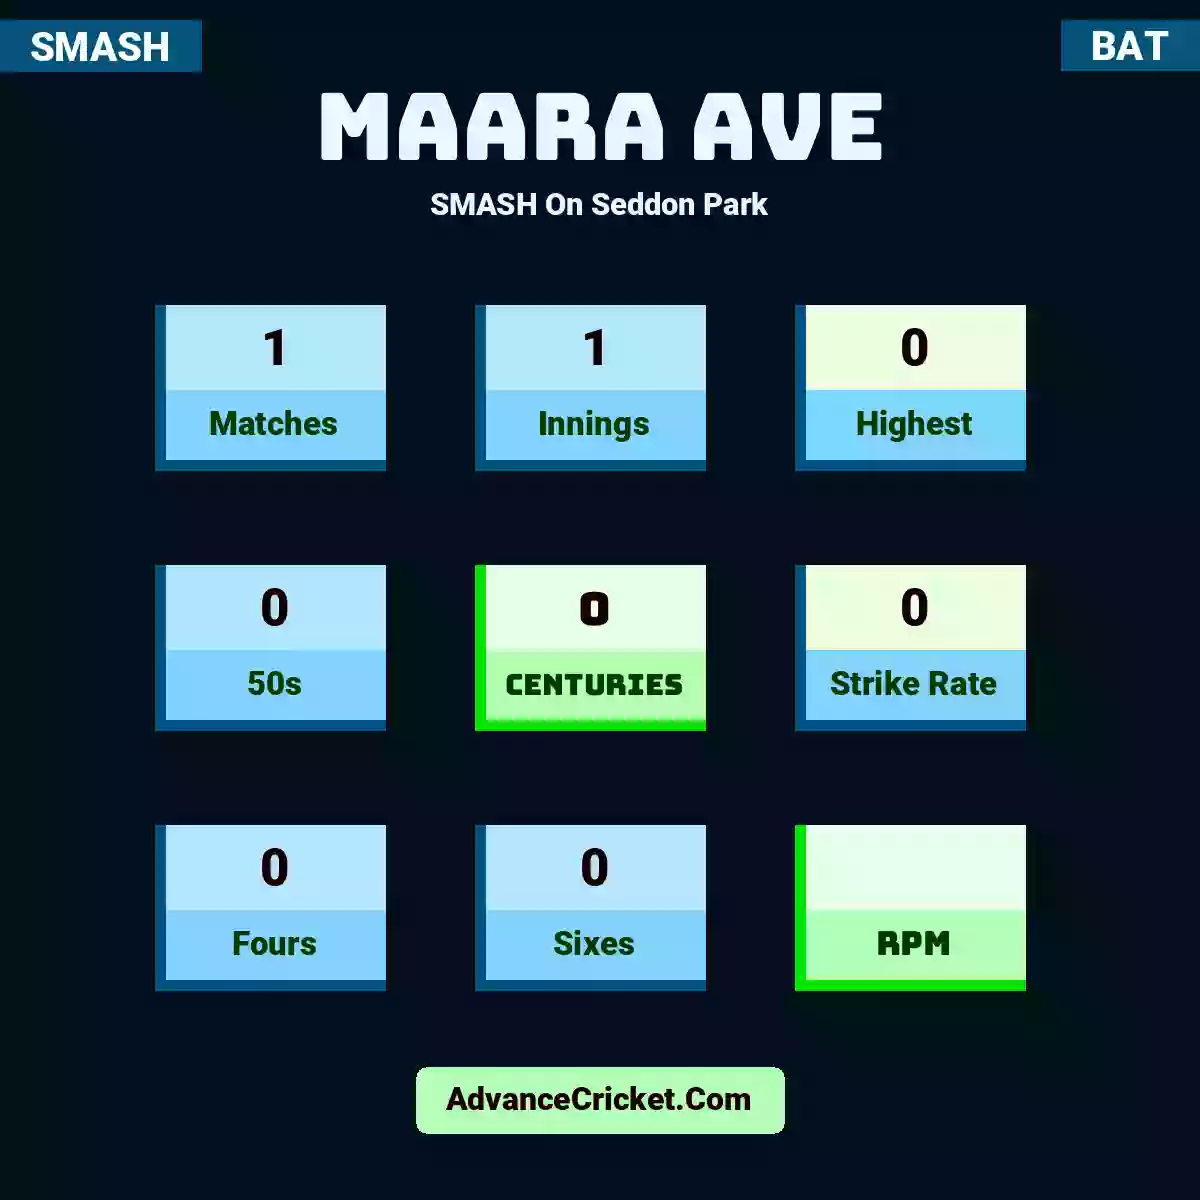 Maara Ave SMASH  On Seddon Park, Maara Ave played 1 matches, scored 0 runs as highest, 0 half-centuries, and 0 centuries, with a strike rate of 0. m.ave hit 0 fours and 0 sixes.